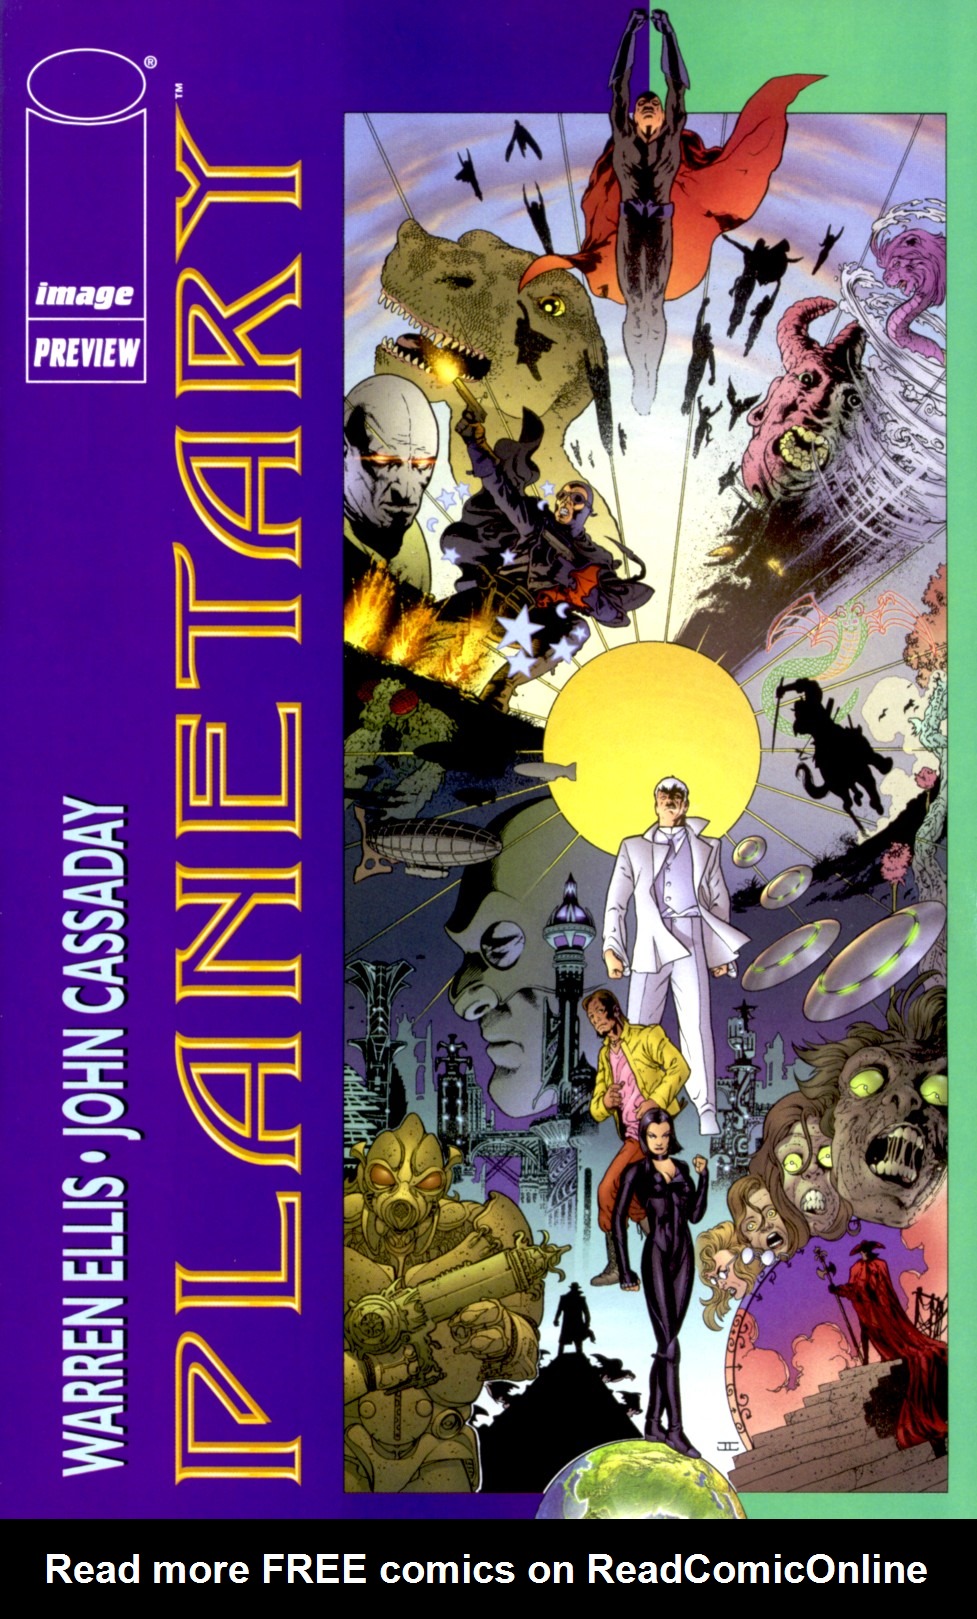 Read online Planetary comic -  Issue # _Preview - 1